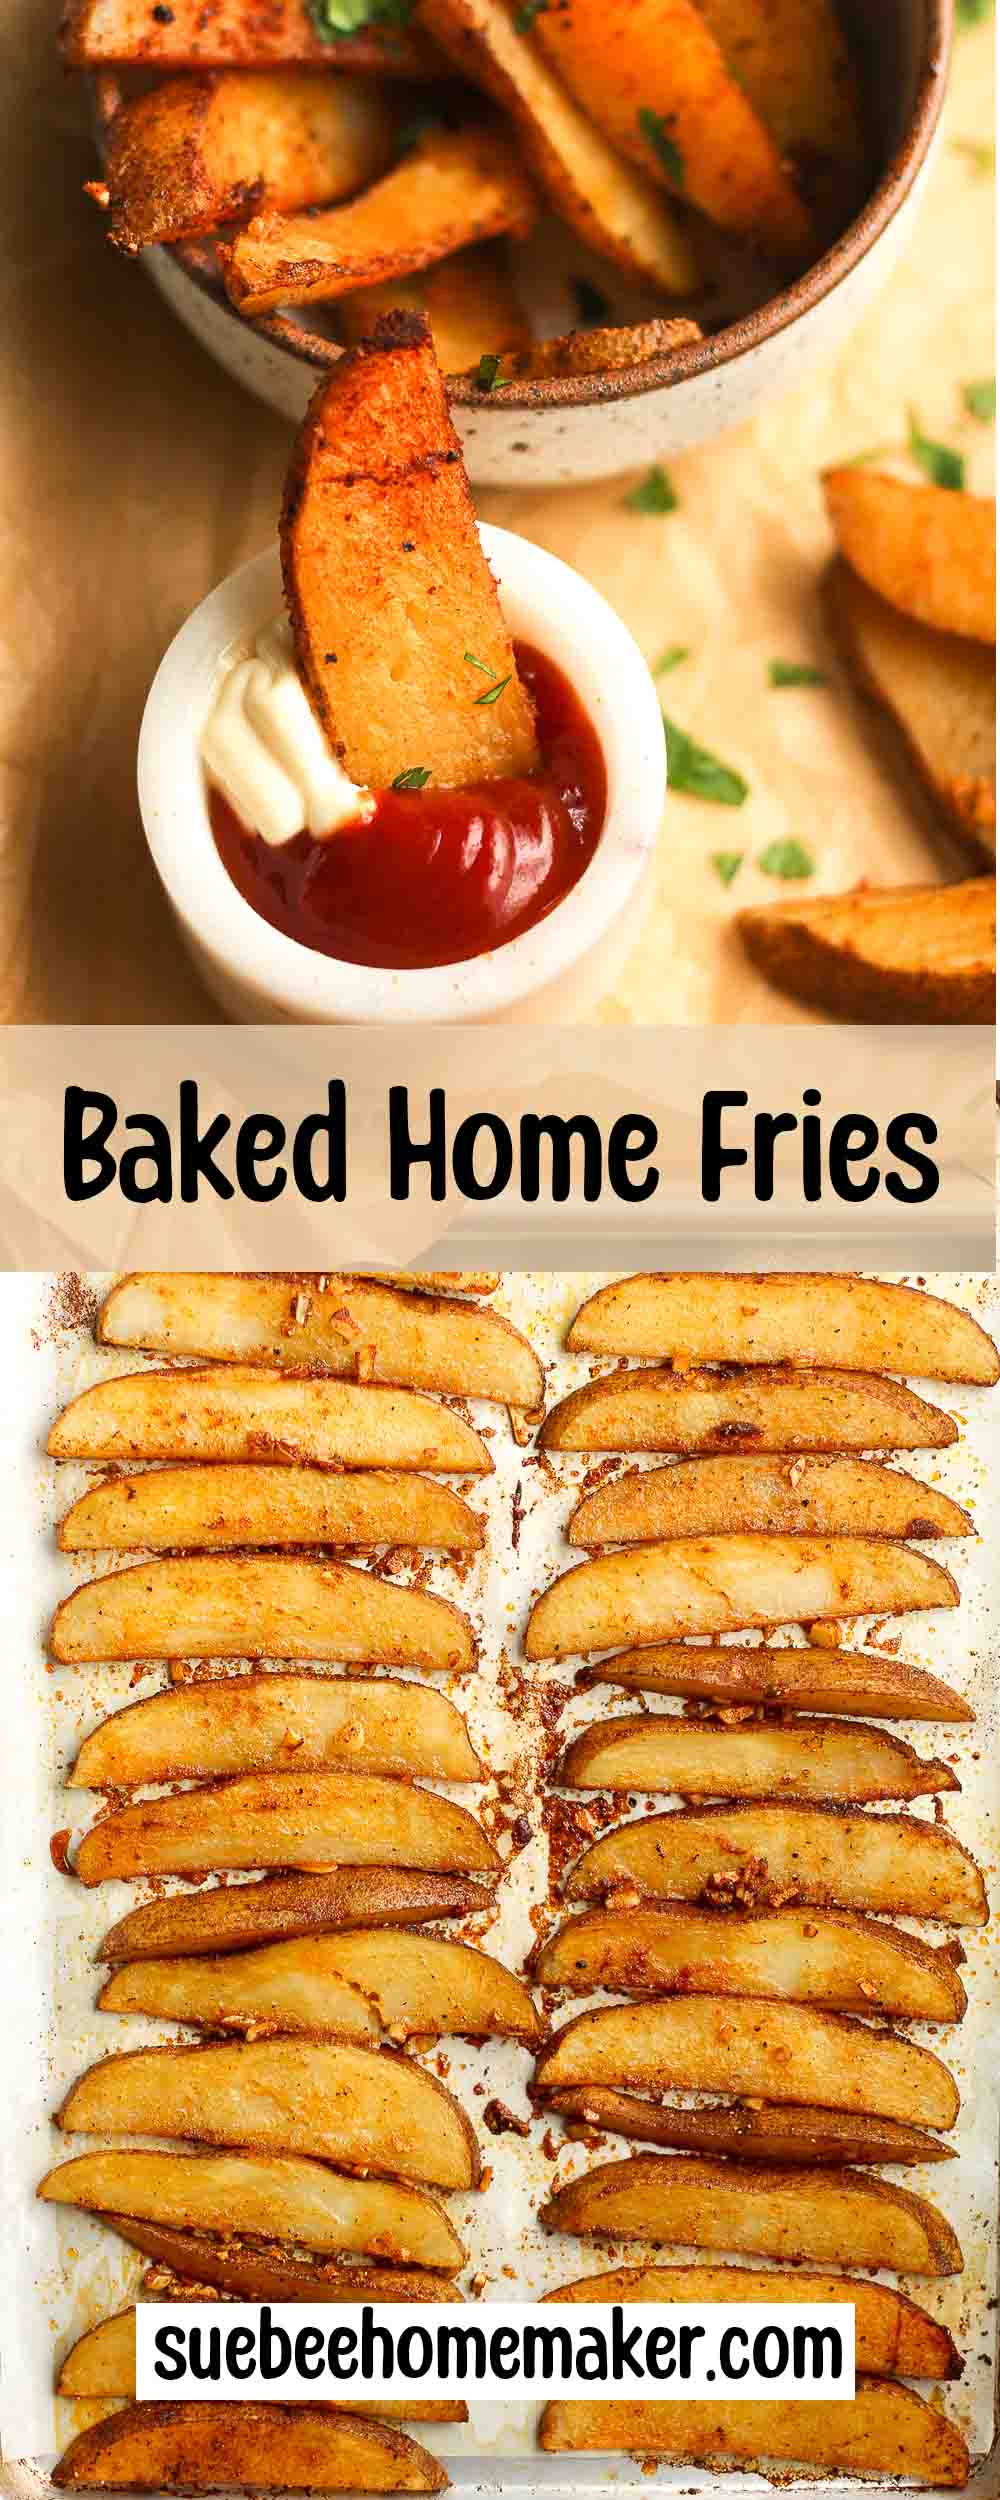 A collage of baked home fries.